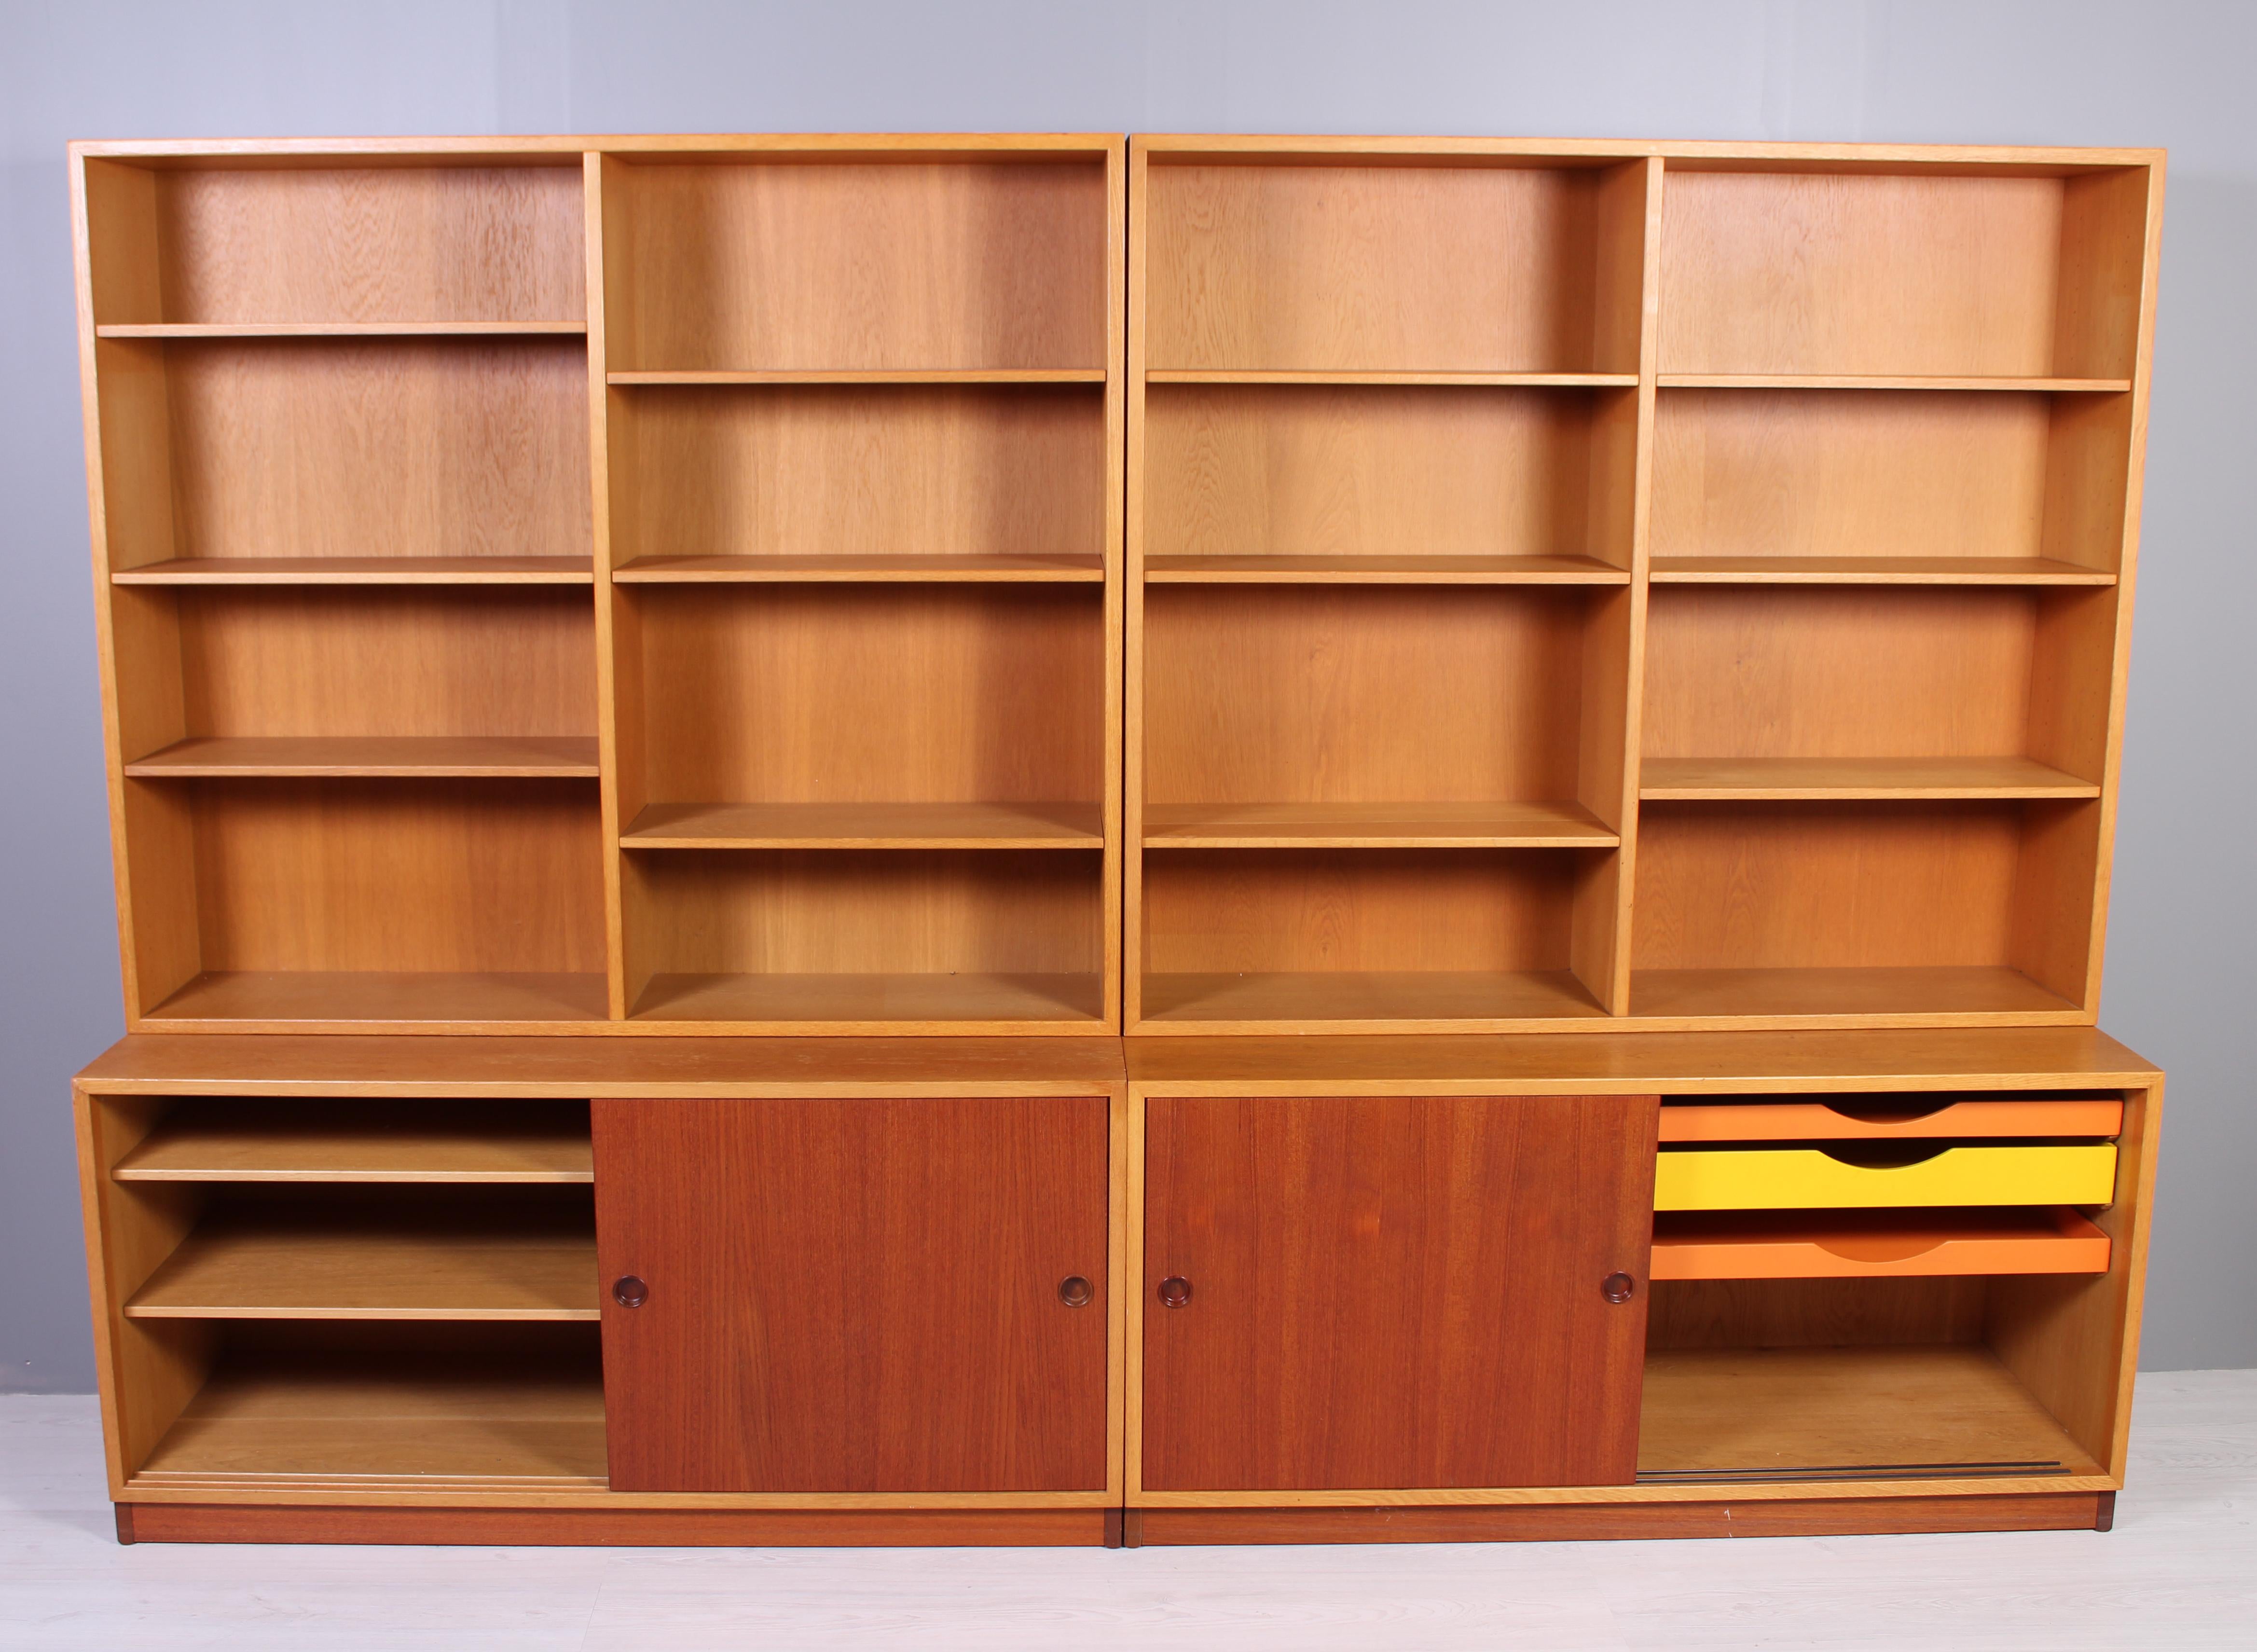 A pair of book cases by Danish designer Børge Mogensen produced by Swedish manufacturer Karl Andersson & Söner in the late 1950s. This is the early version of this design with the teak base and the colored drawers. These pieces was purchased in the